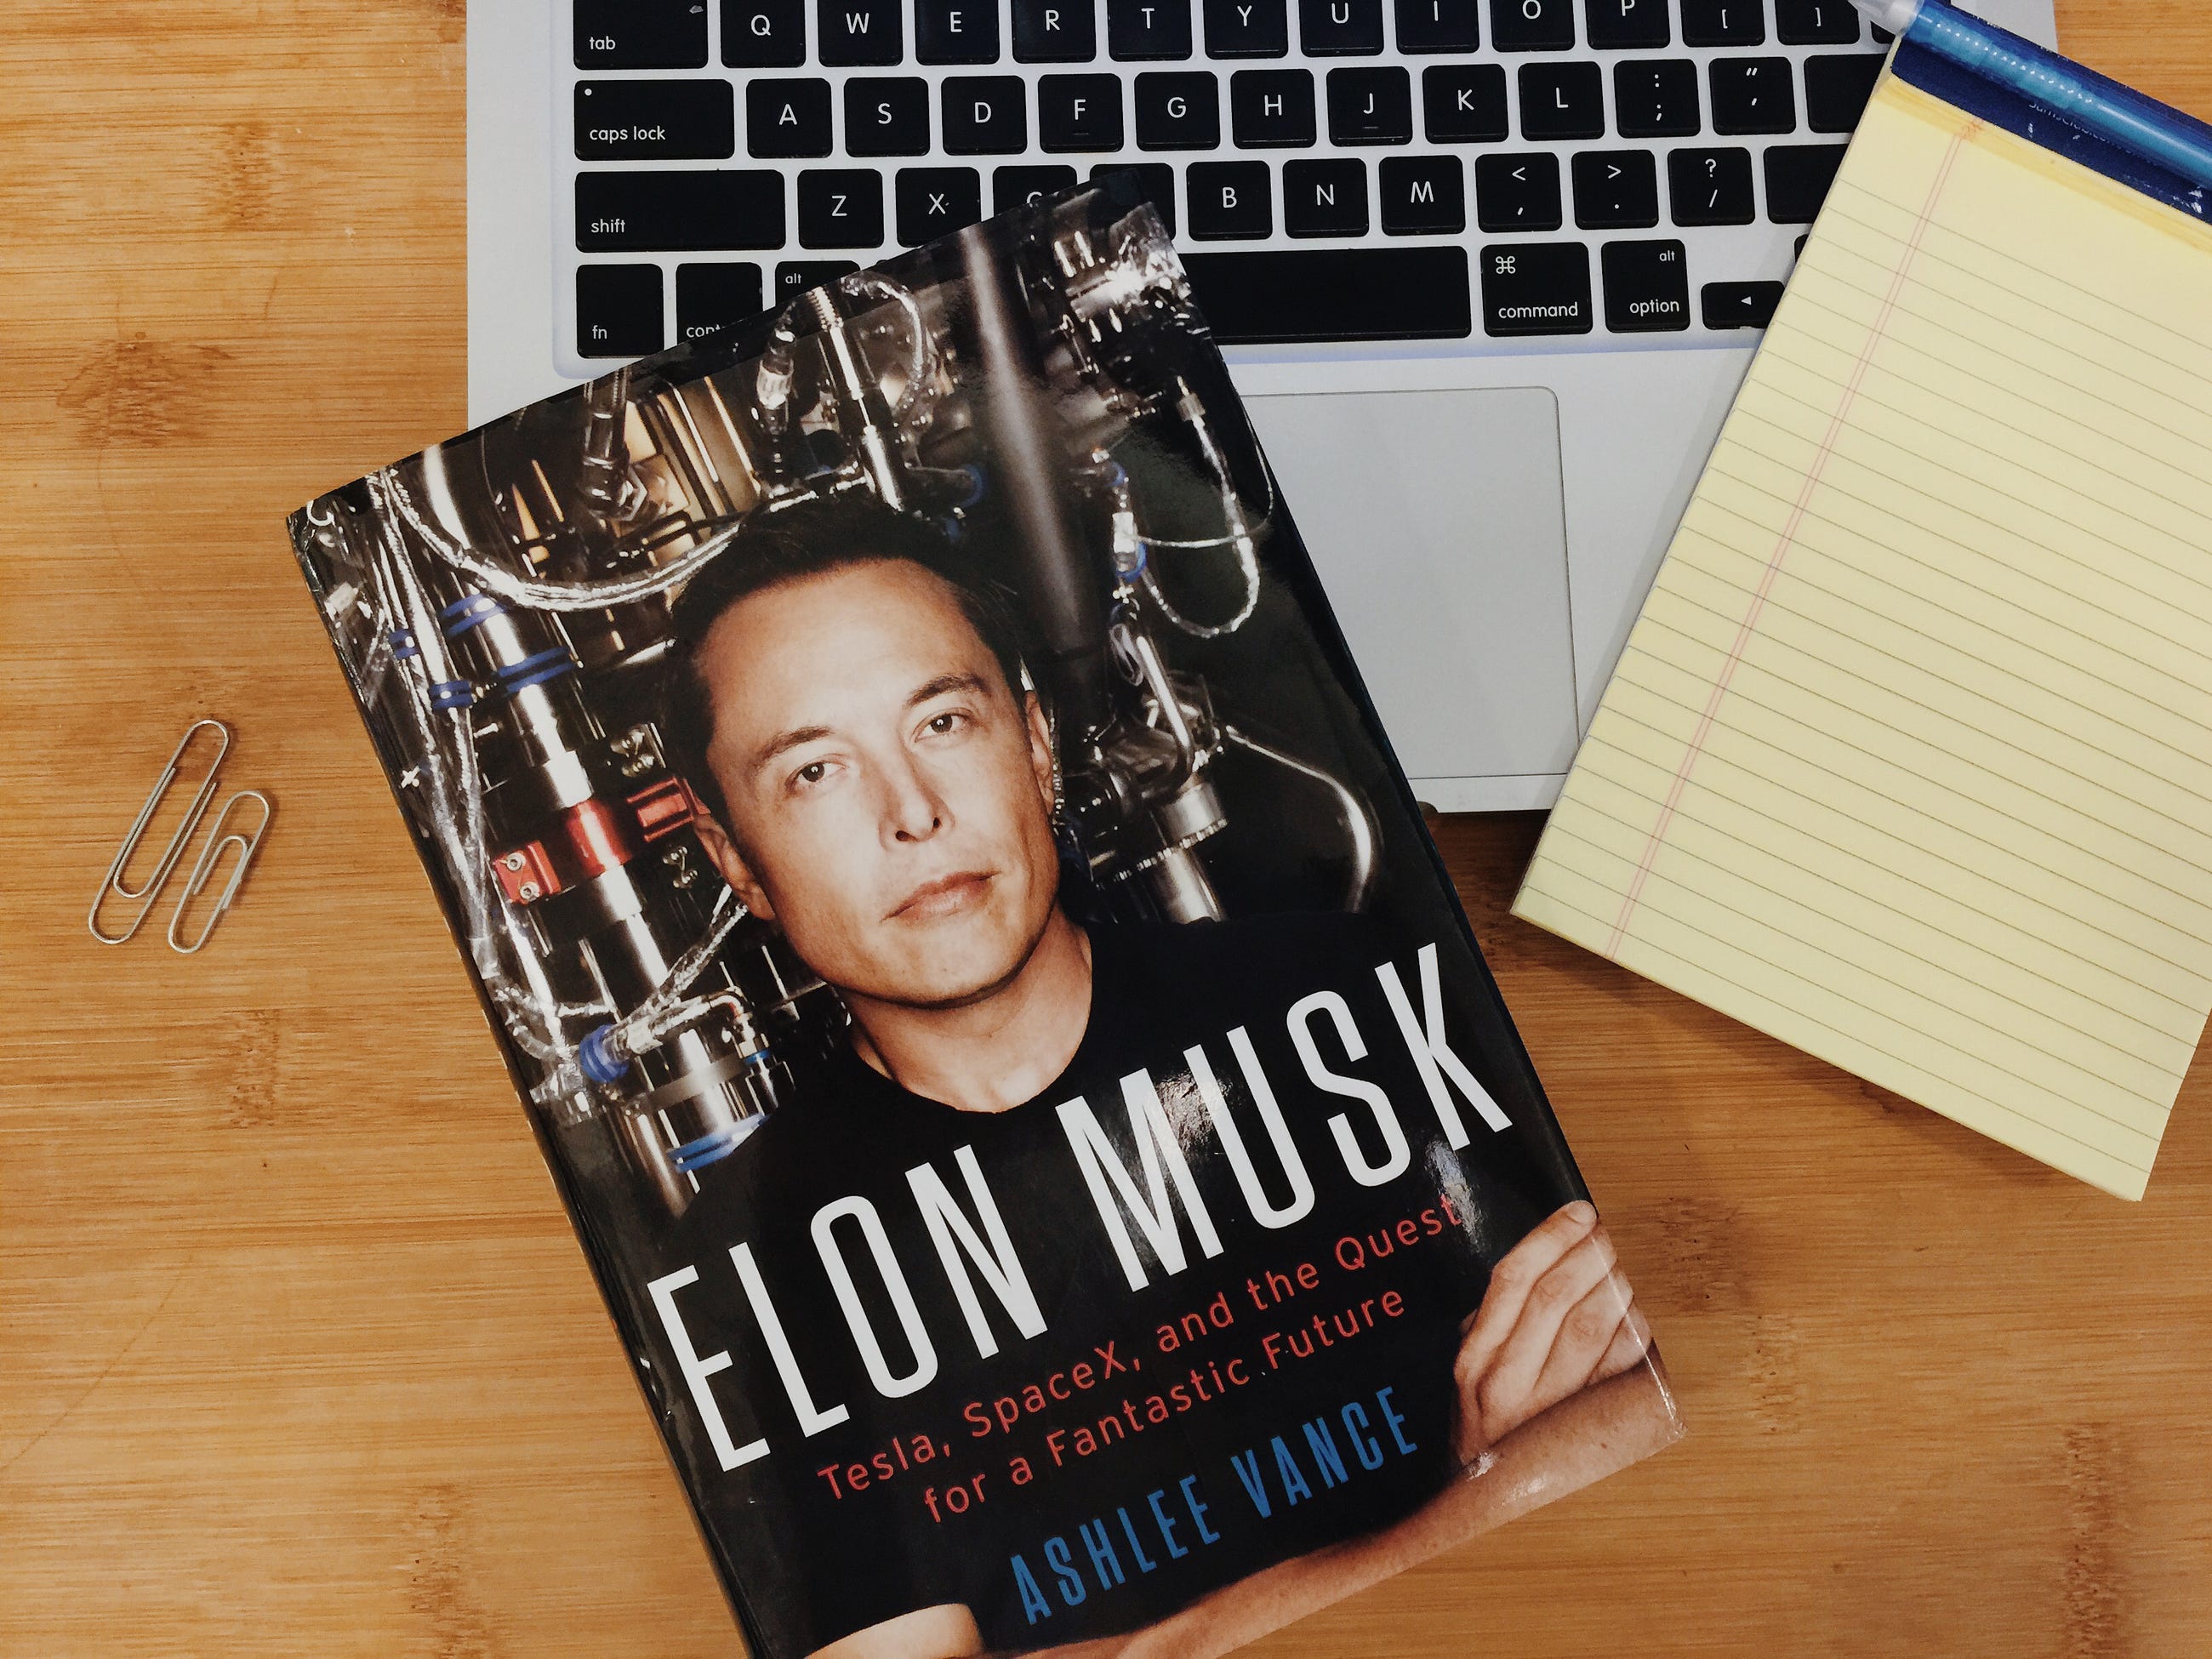 Elon Musk: Tesla, SpaceX, and the Quest for a Fantastic Future by Ashley Vance 